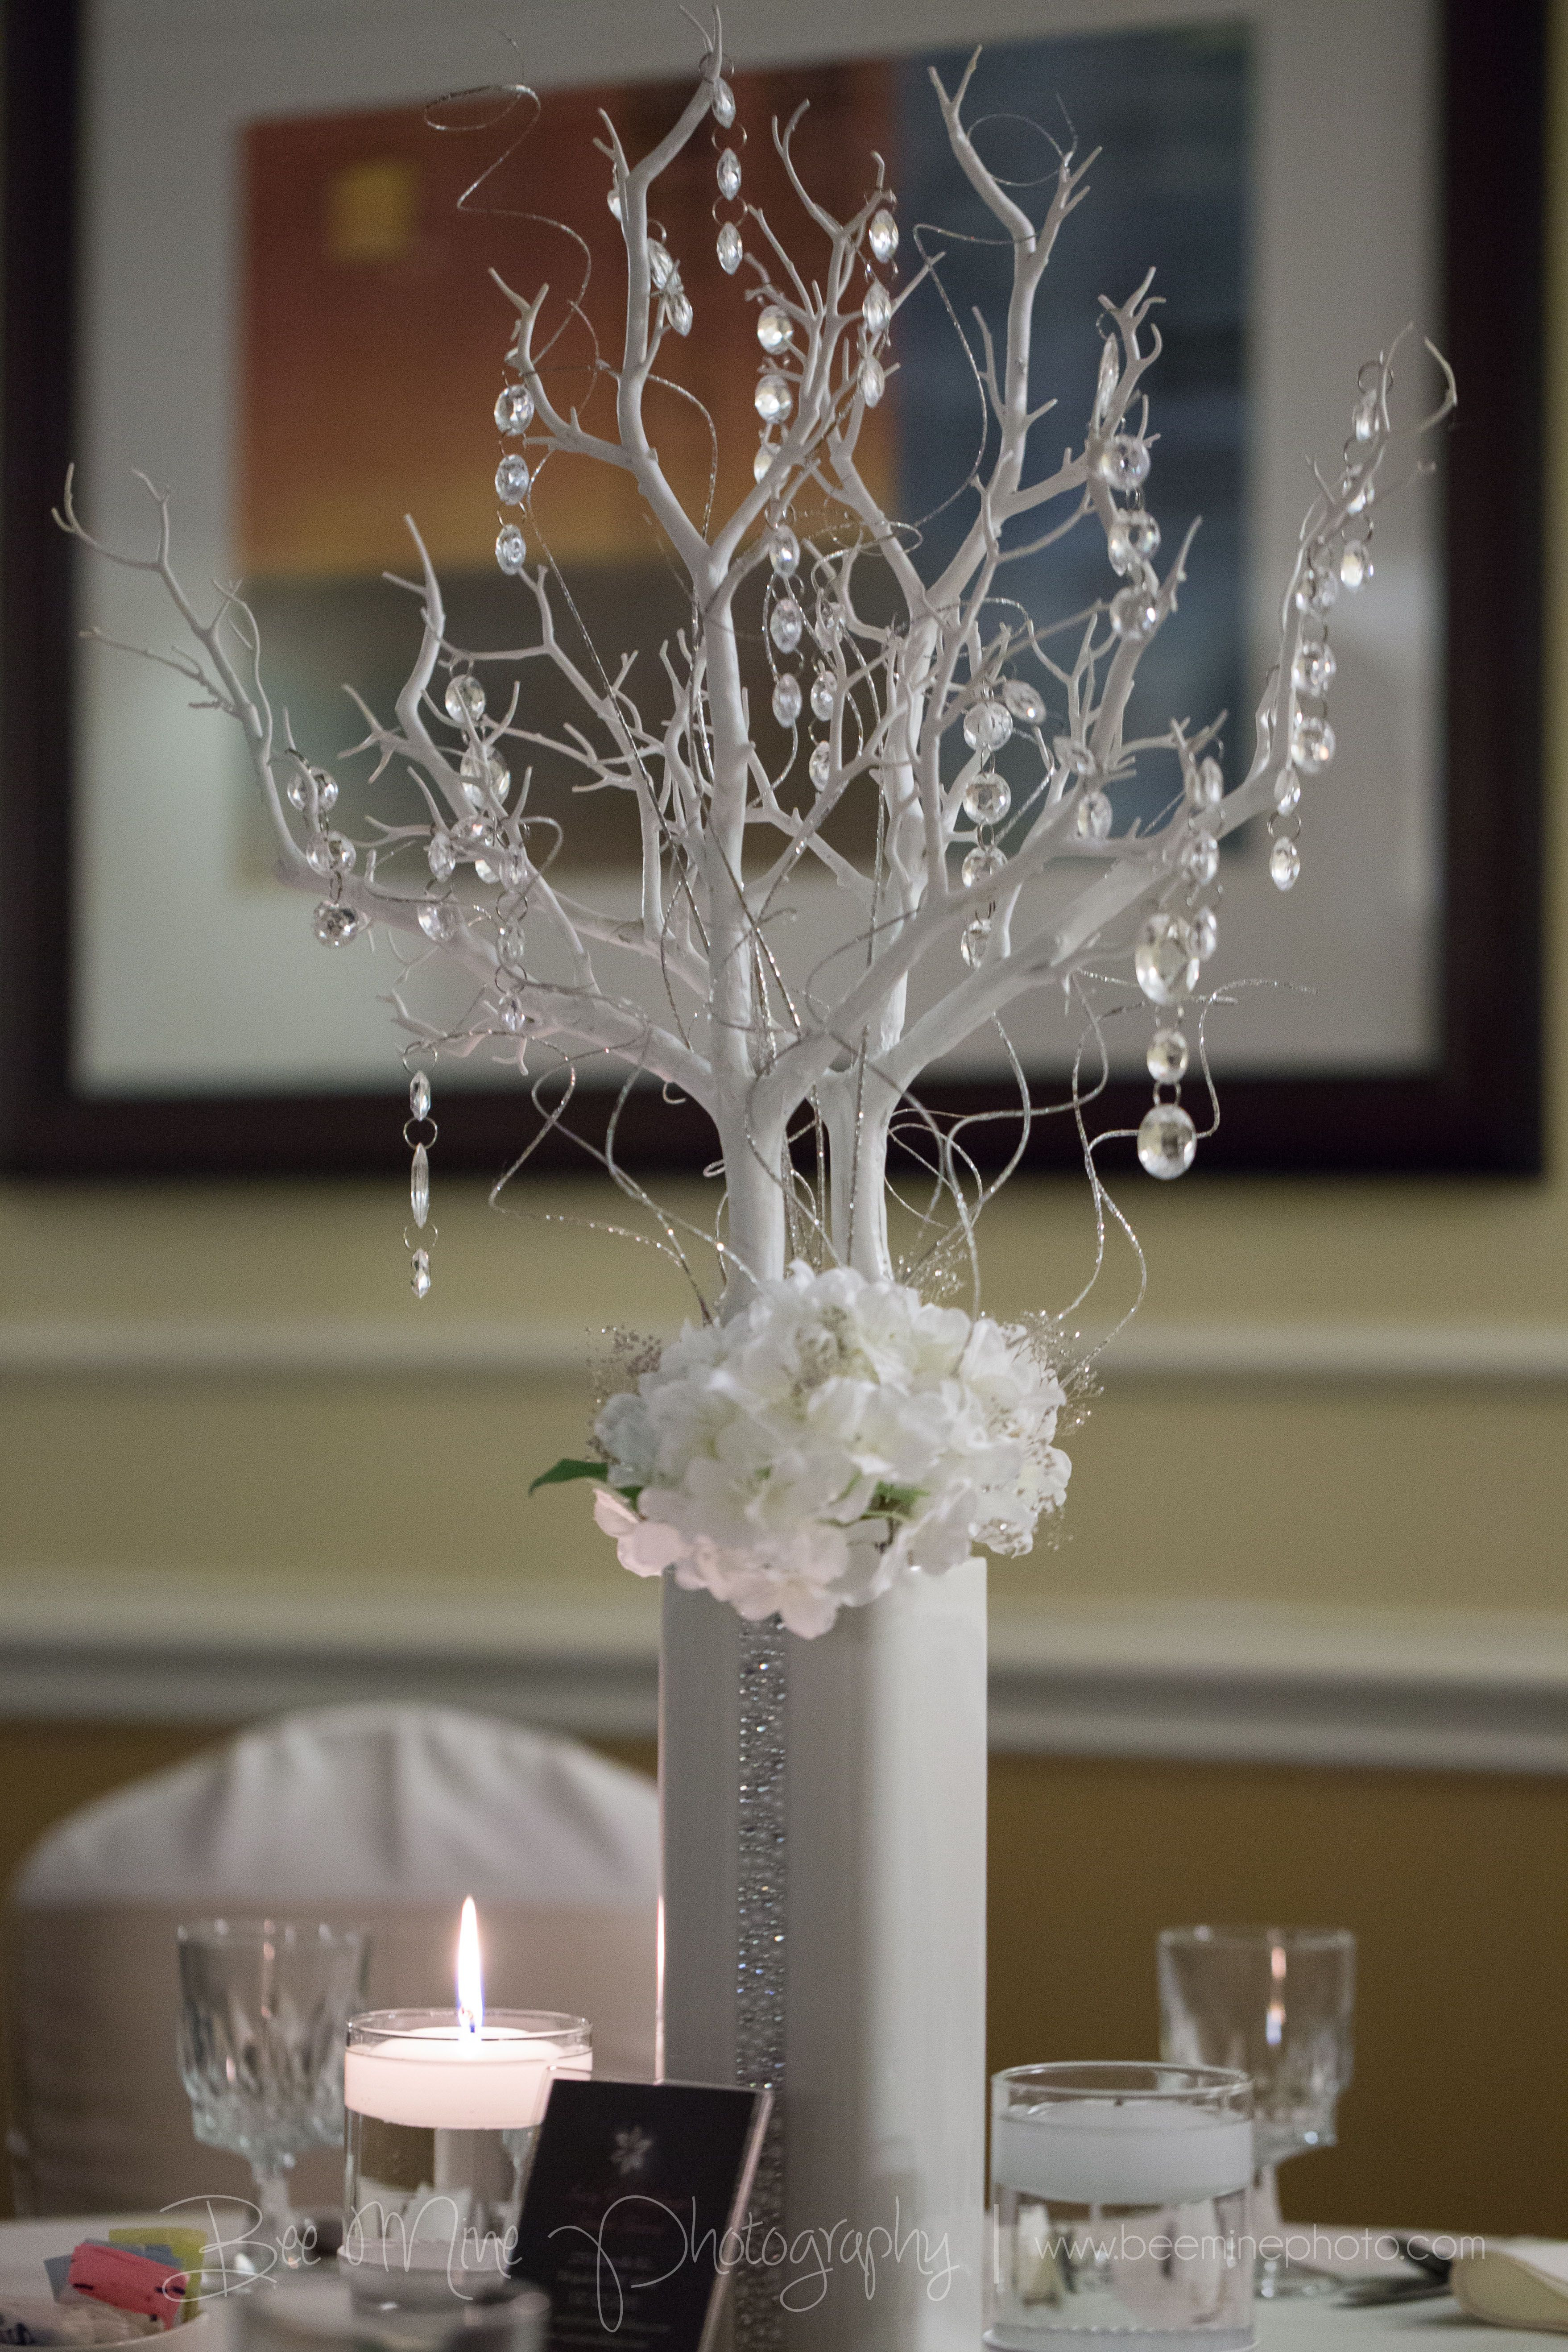 decorative twigs for vases of decorative twig tree new dollar tree wedding decorations awesome h intended for decorative twig tree new dollar tree wedding decorations awesome h vases dollar vase i 0d